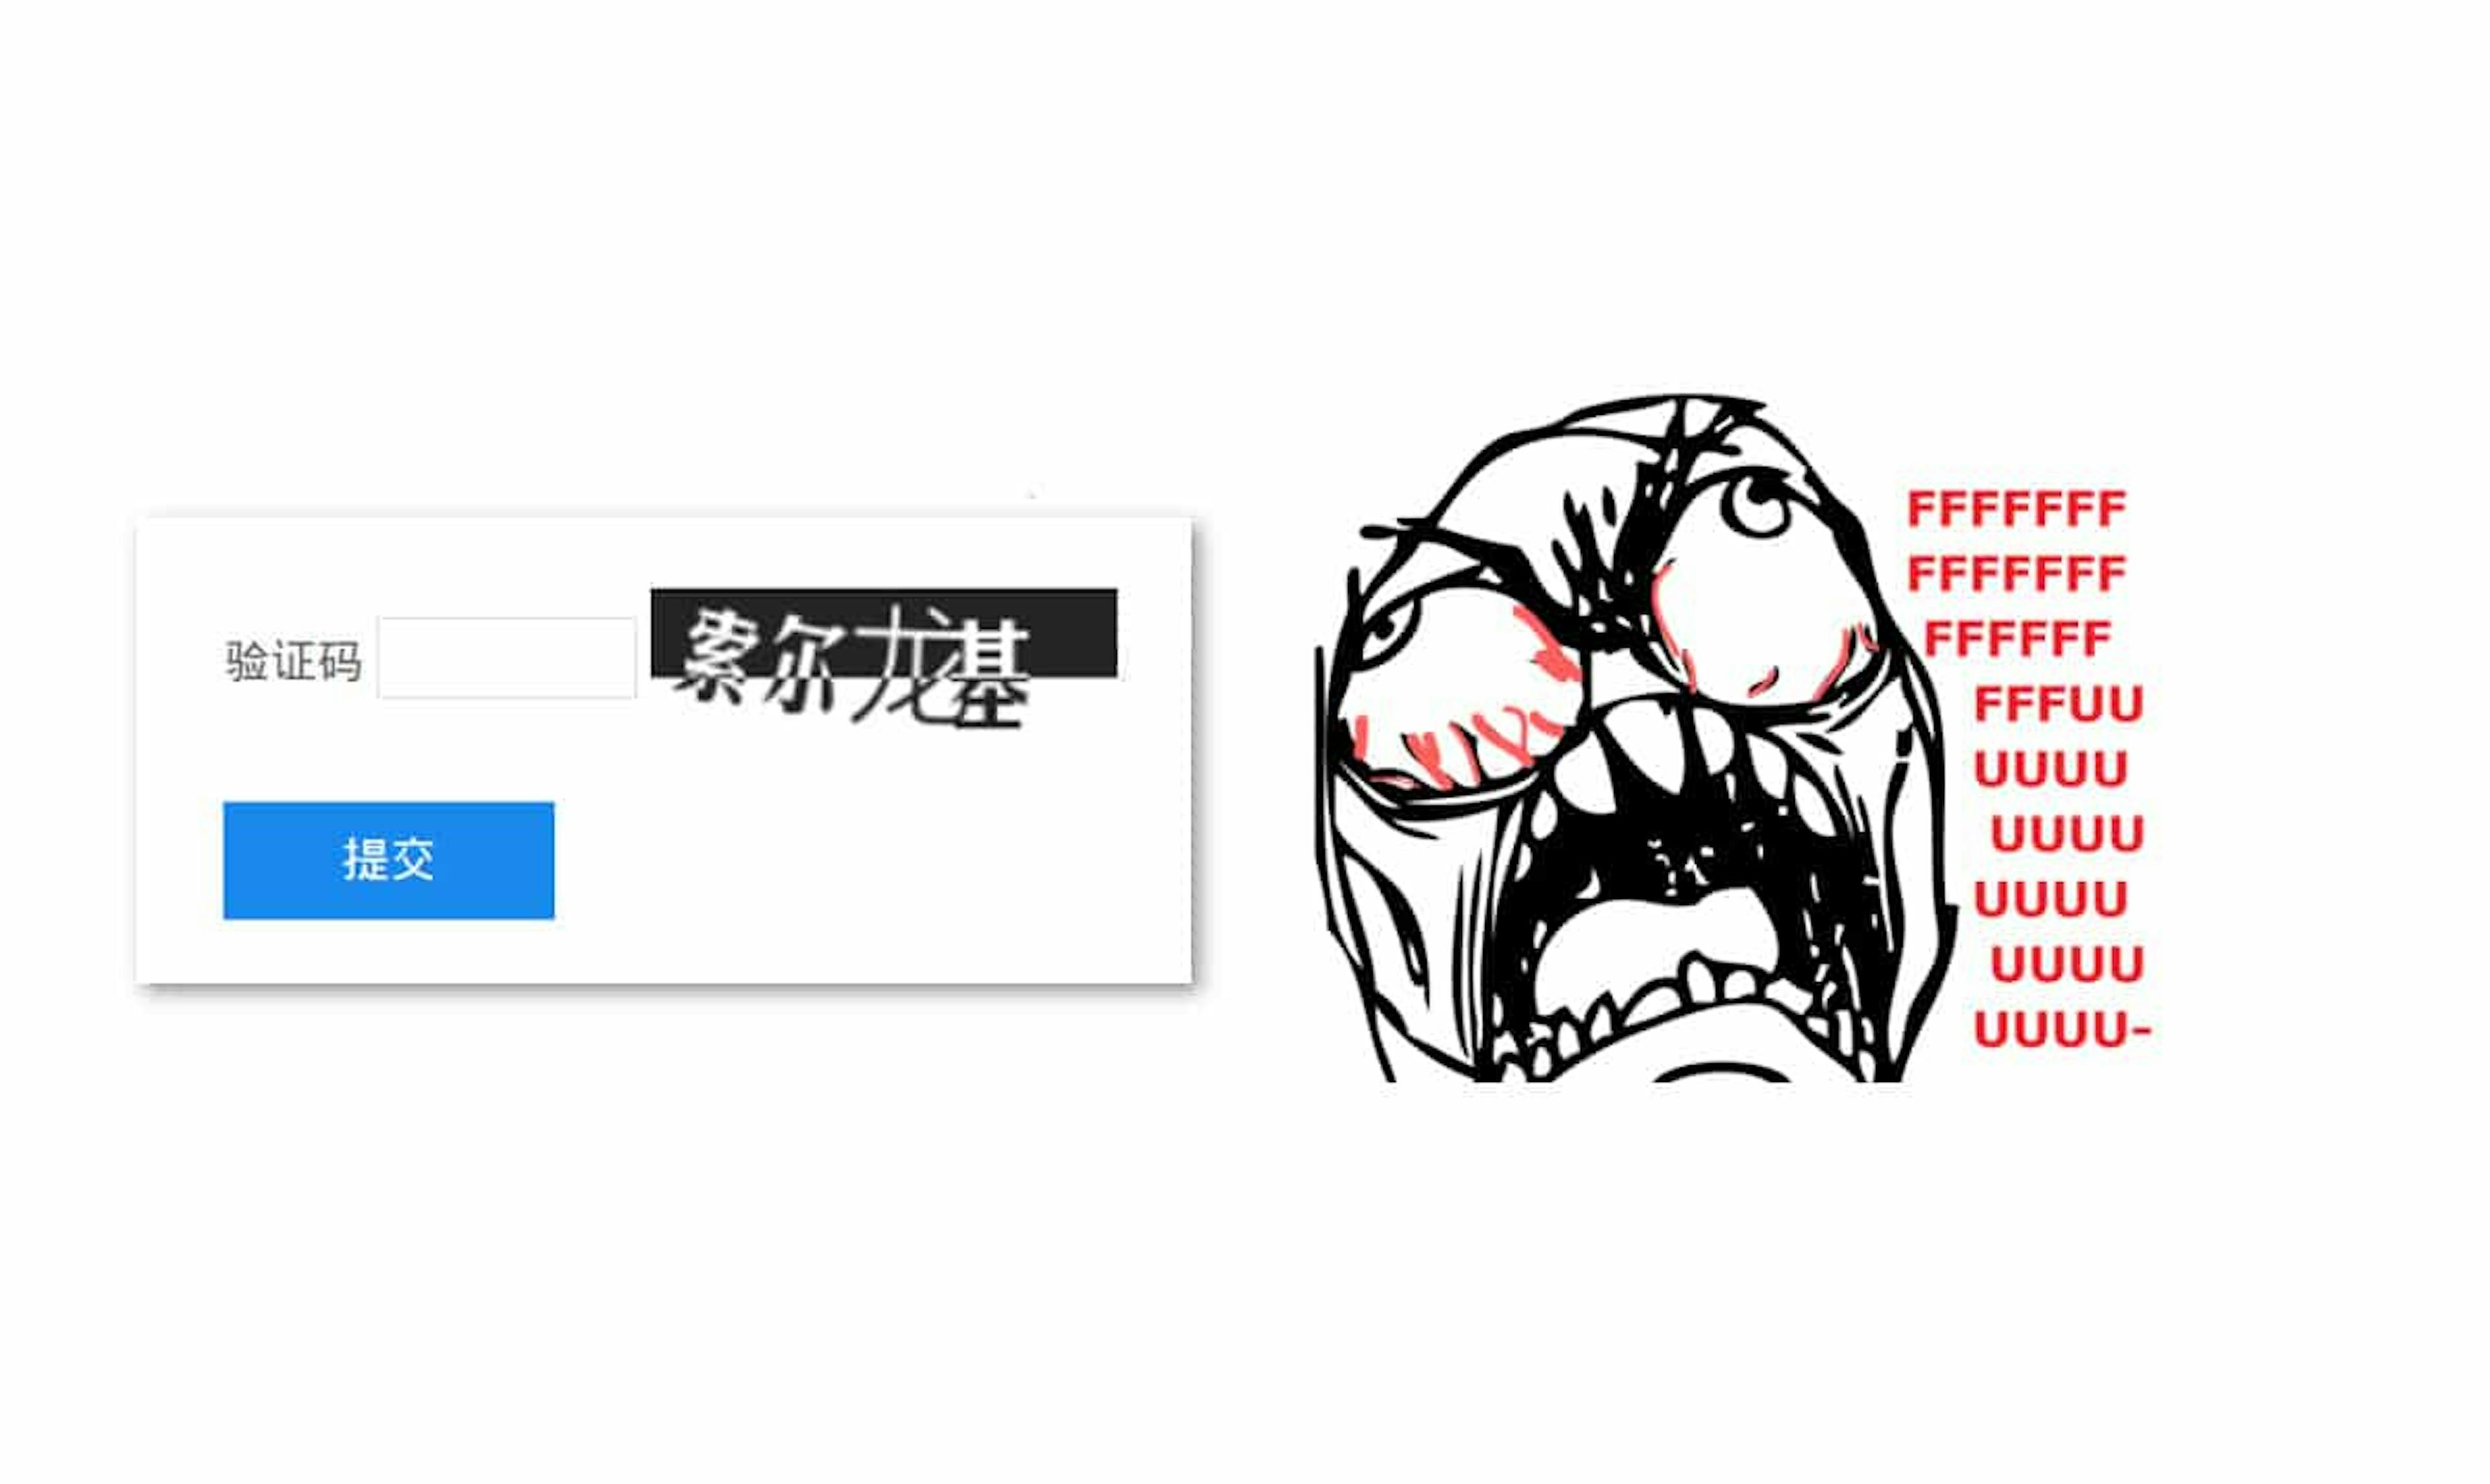 Oh, snap! Not the Chinese Captcha...